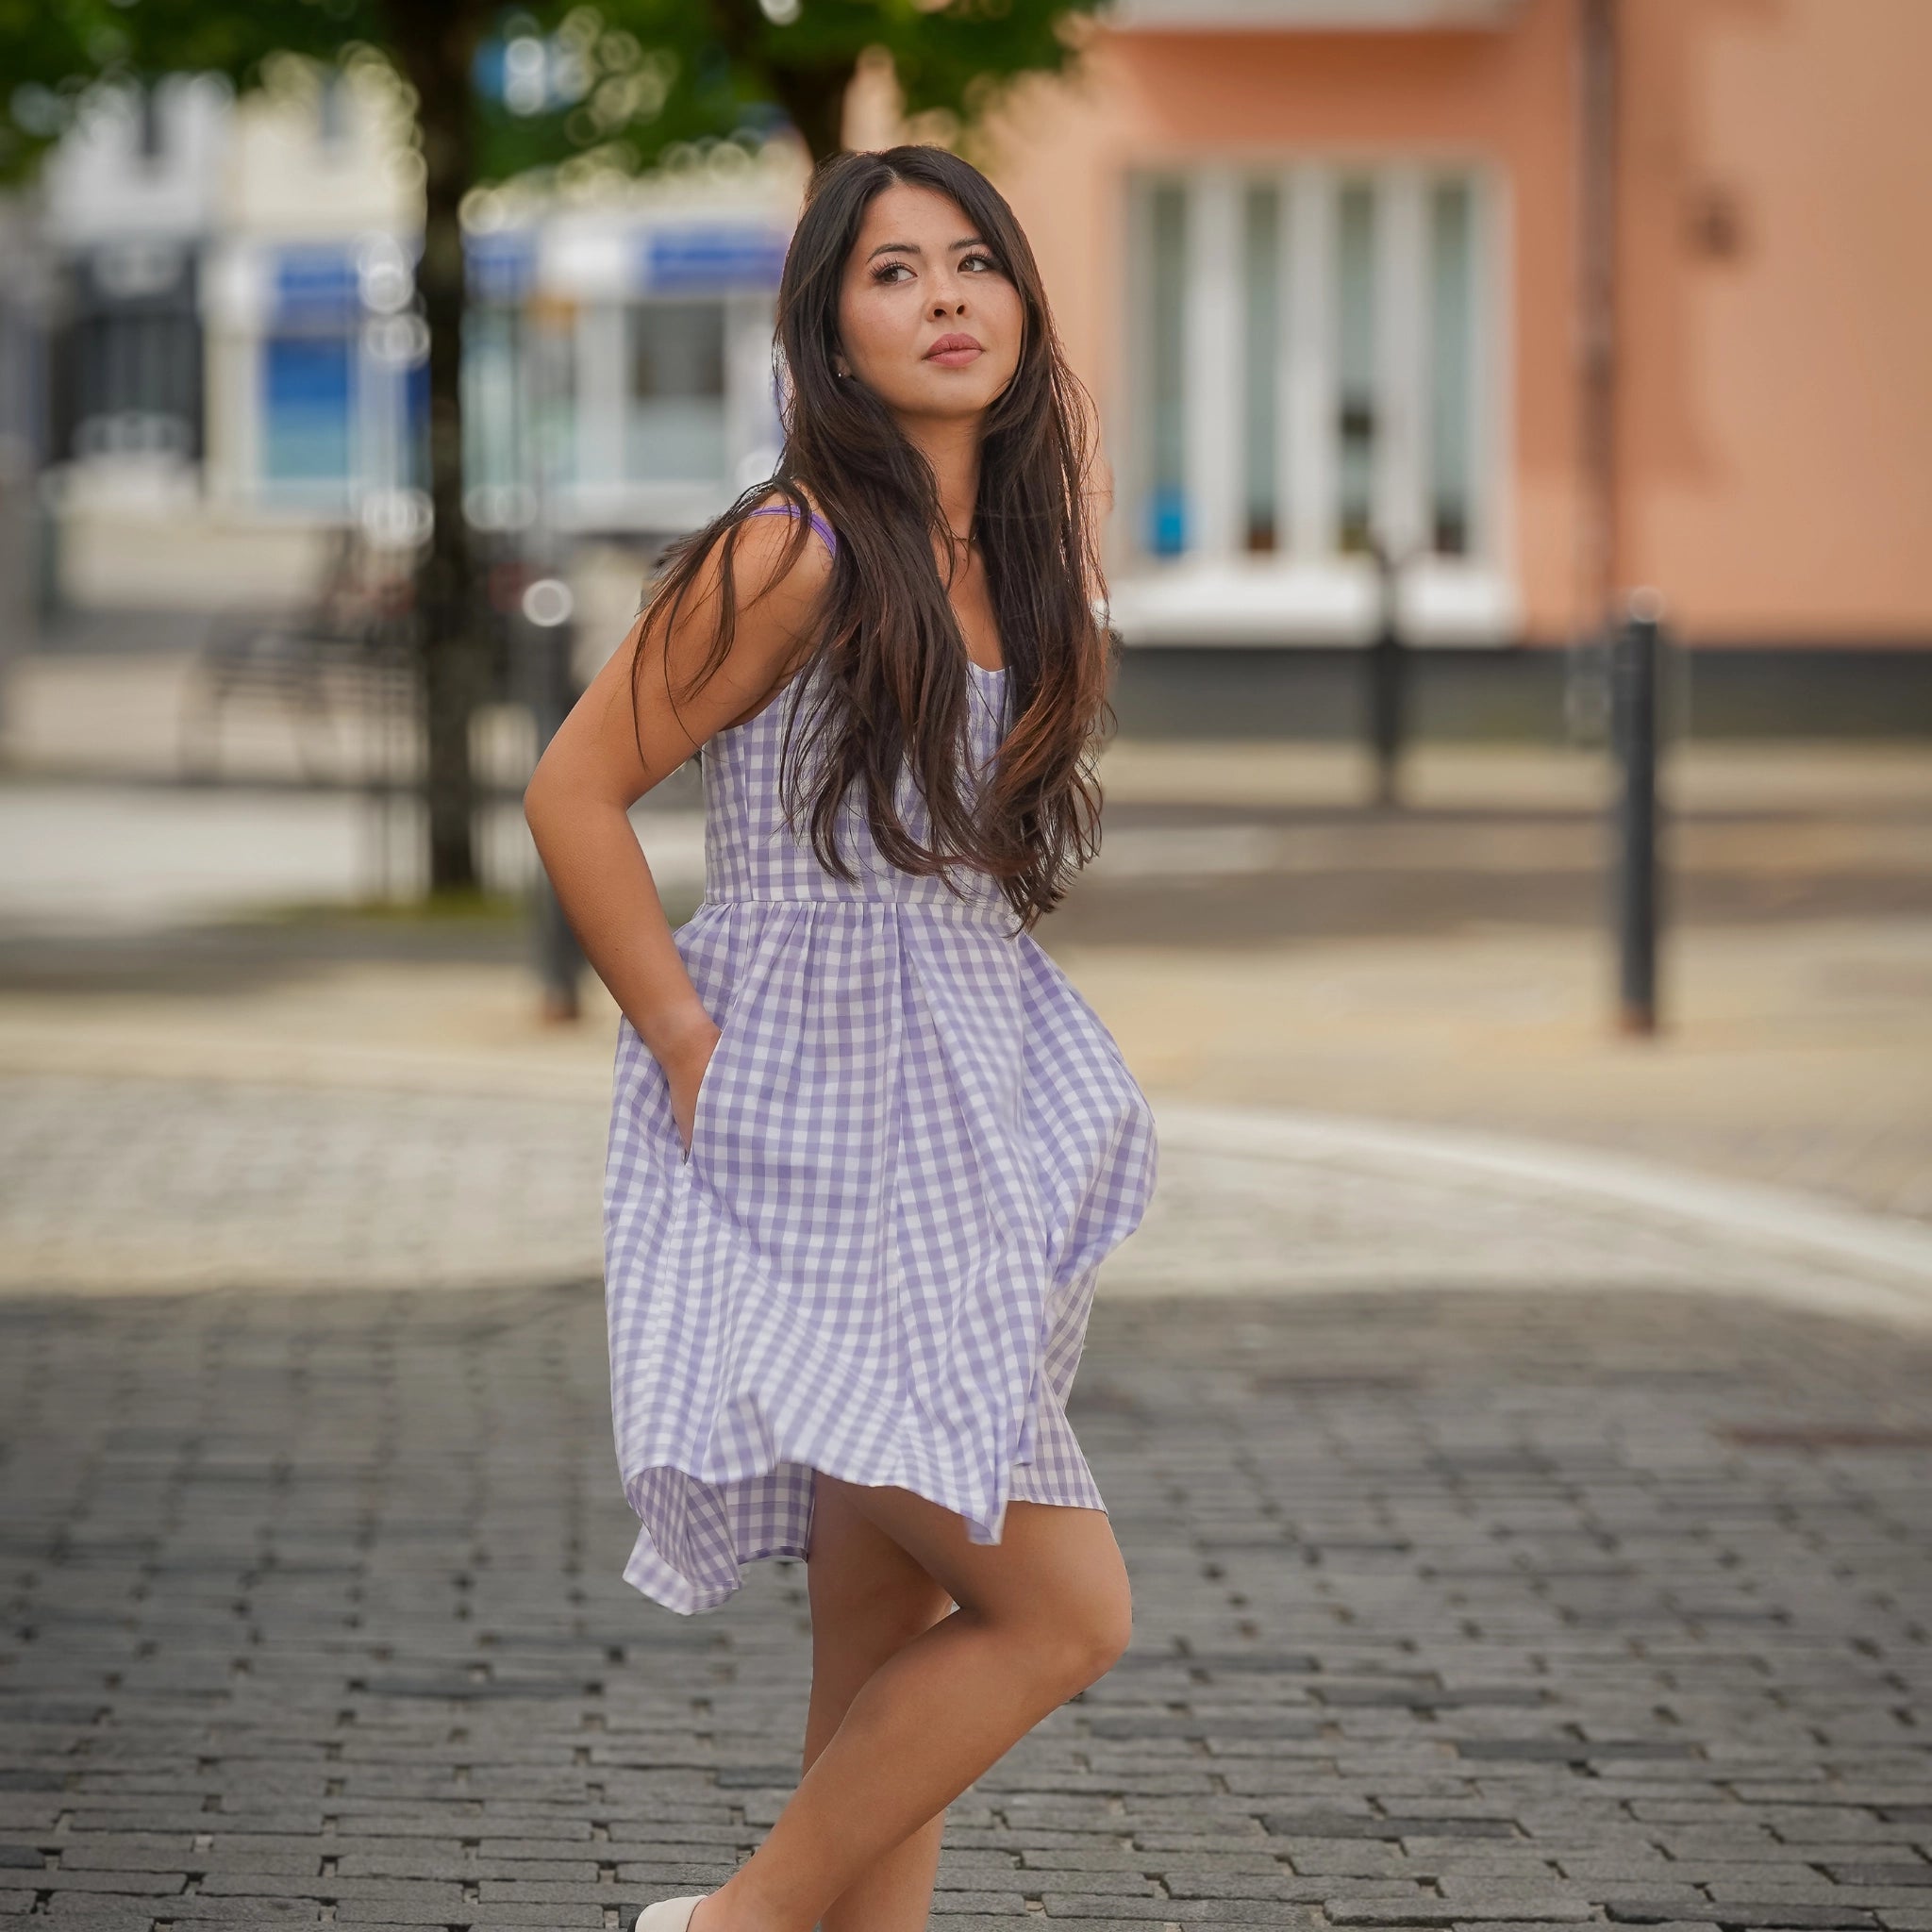 A woman in the Karee Effortless Summer Style: Sustainable Lavender Gingham Mini Dress with hands in pockets stands on a paved street with blurred buildings and greenery in the background.